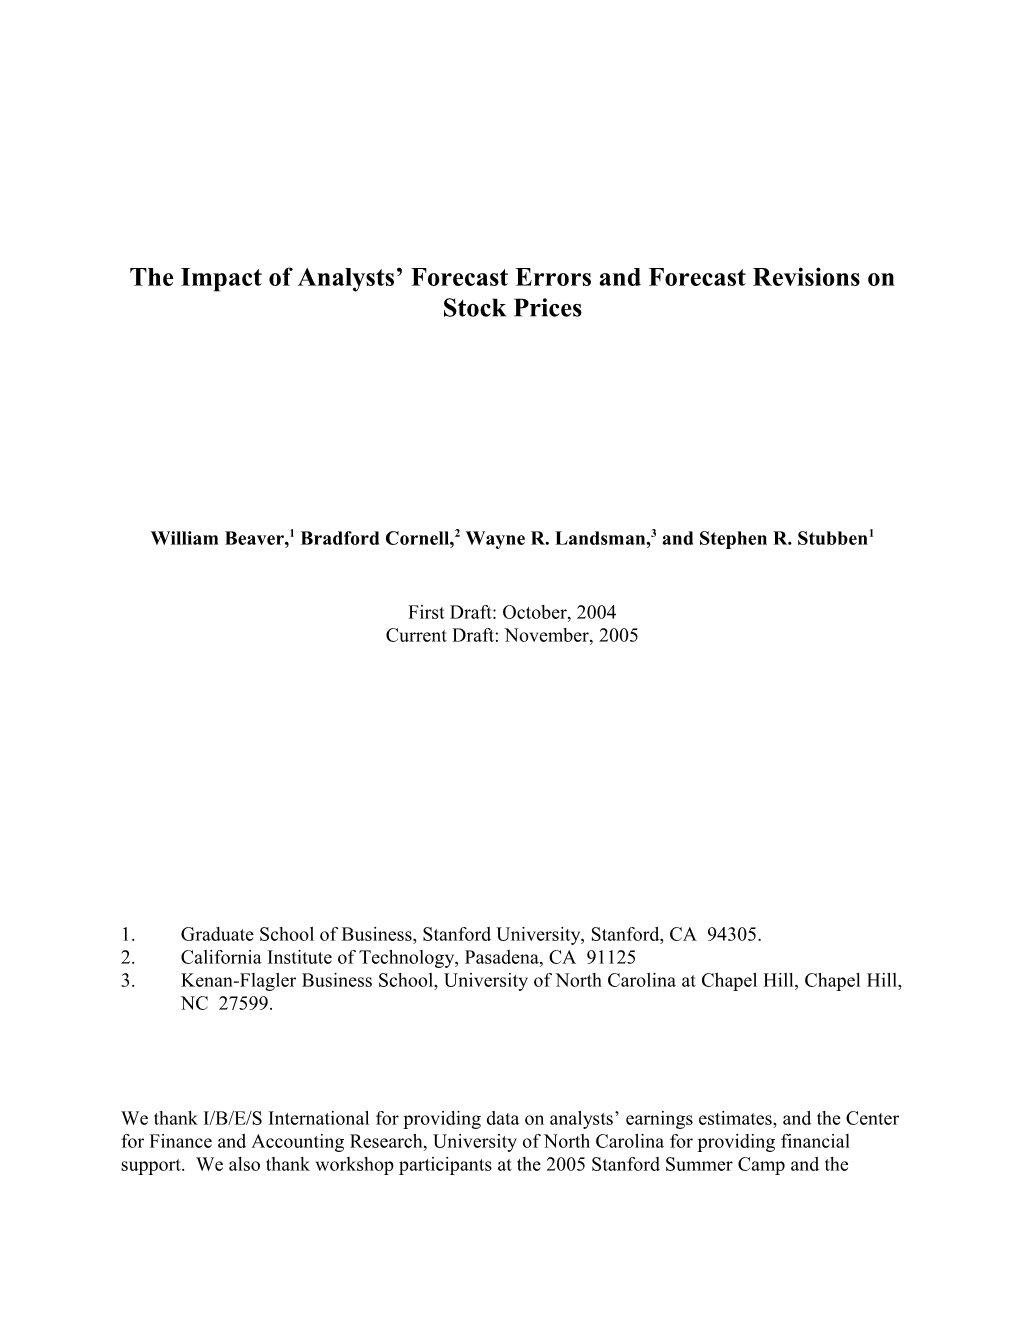 The Impact of Analysts Forecast Errors and Forecast Revisions on Stock Prices